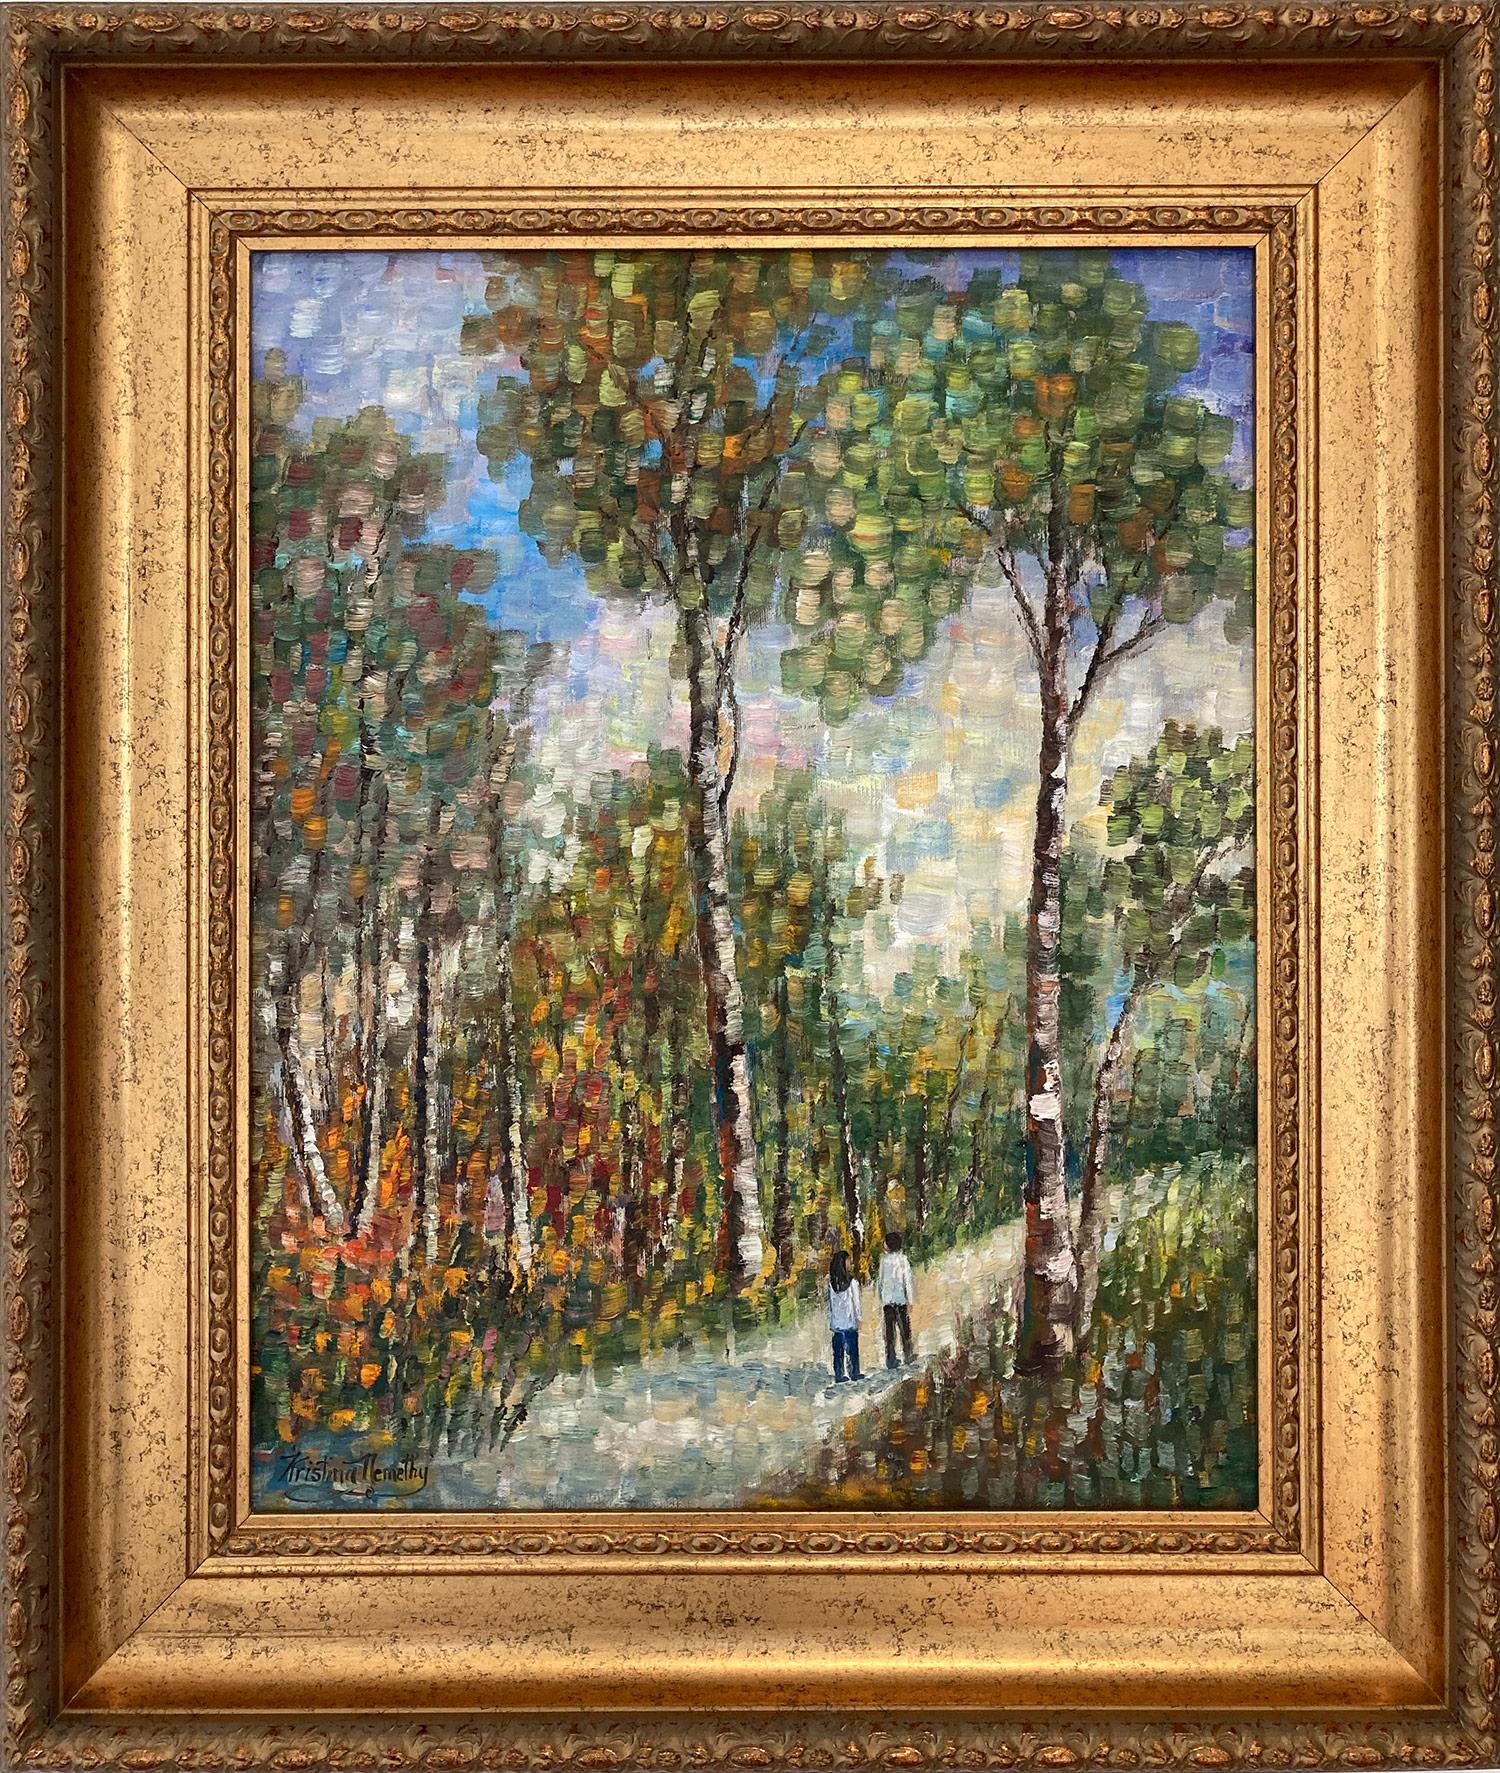 Kristina Nemethy Landscape Painting - "A Walk Along the Woods" Impressionistic Oil on Canvas Painting Figures Walking